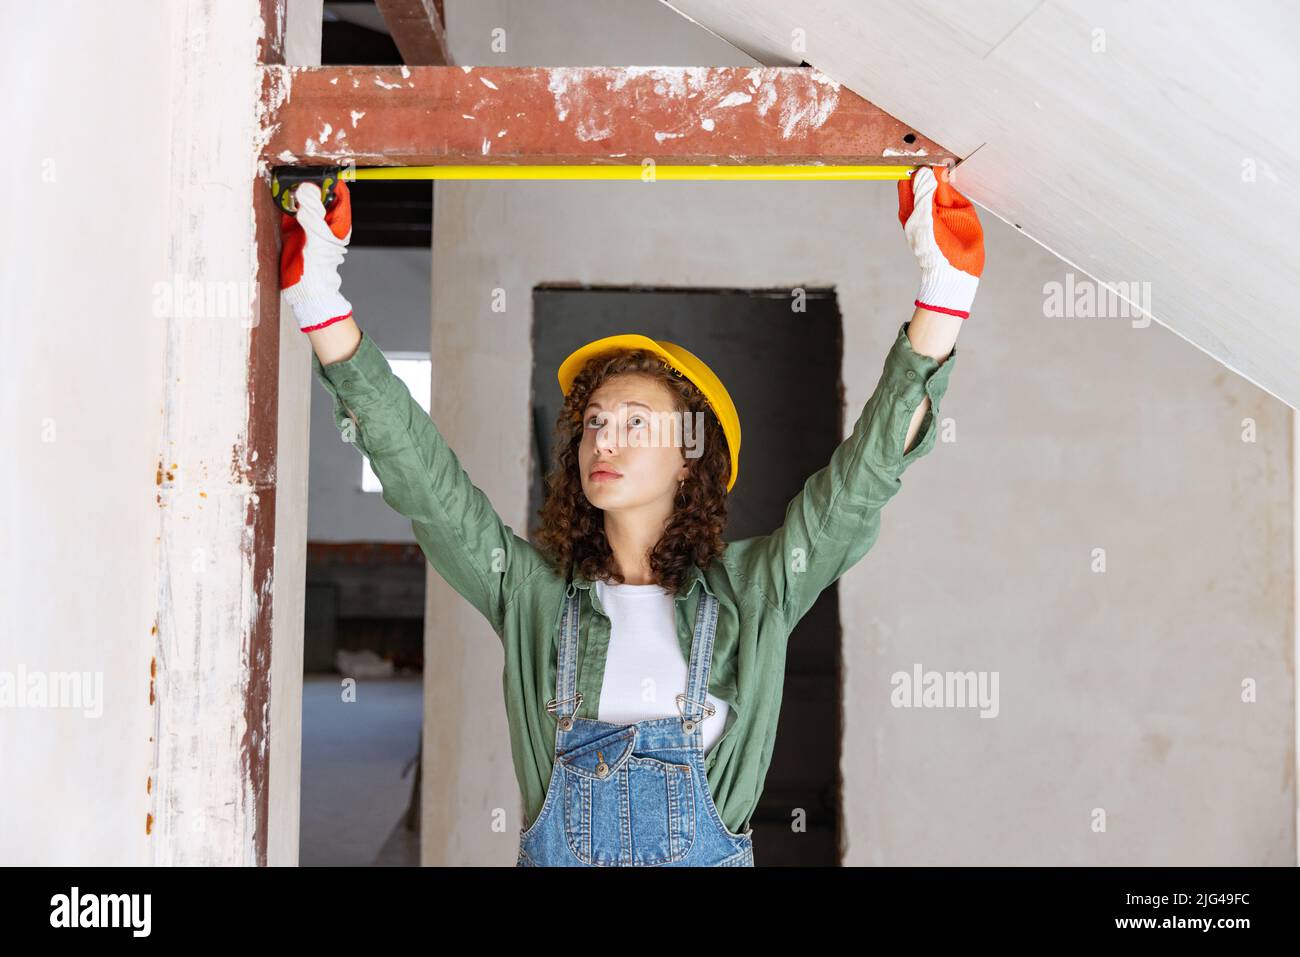 Live portrait of young woman, builder wearing helmet using different work tools at a construction site. Gender equality, job, work concept Stock Photo